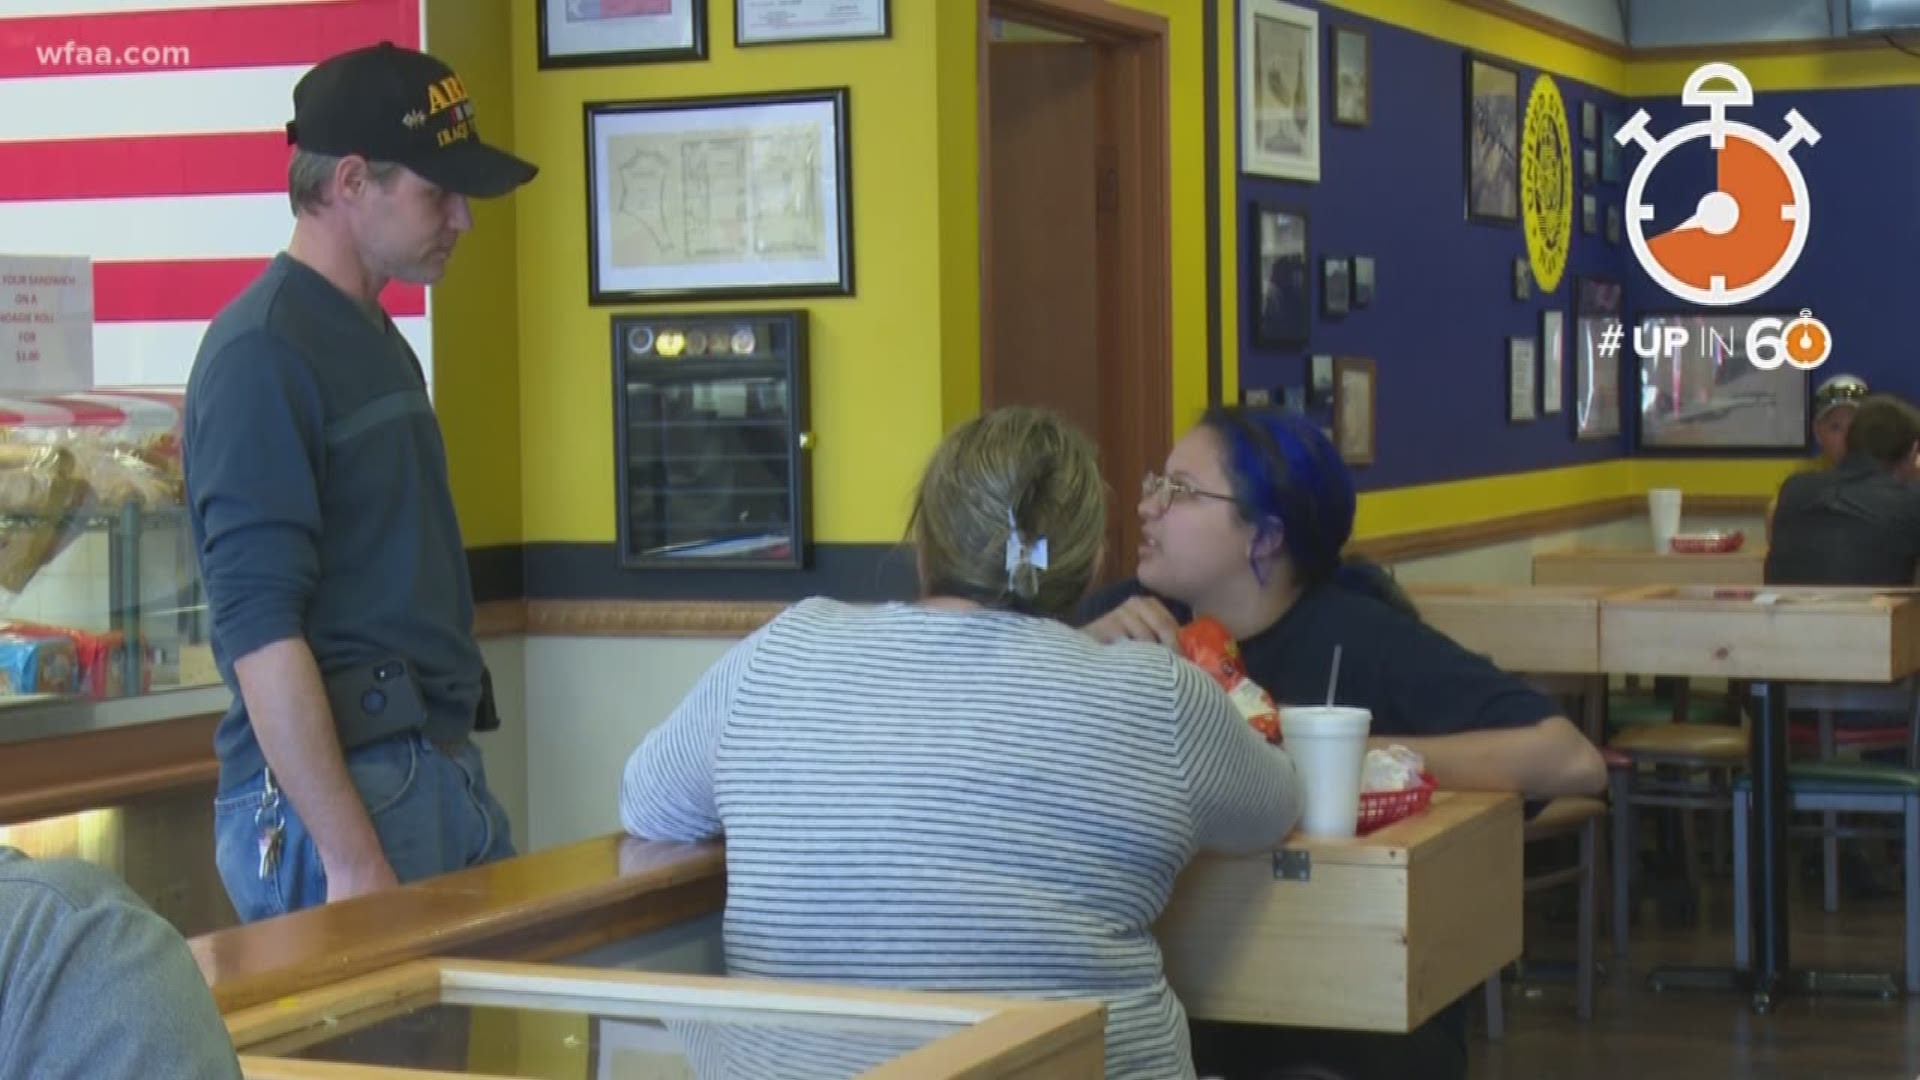 After being a homeless vet himself, the owner opened Patriot Sandwich Company to raise funds supporting others.